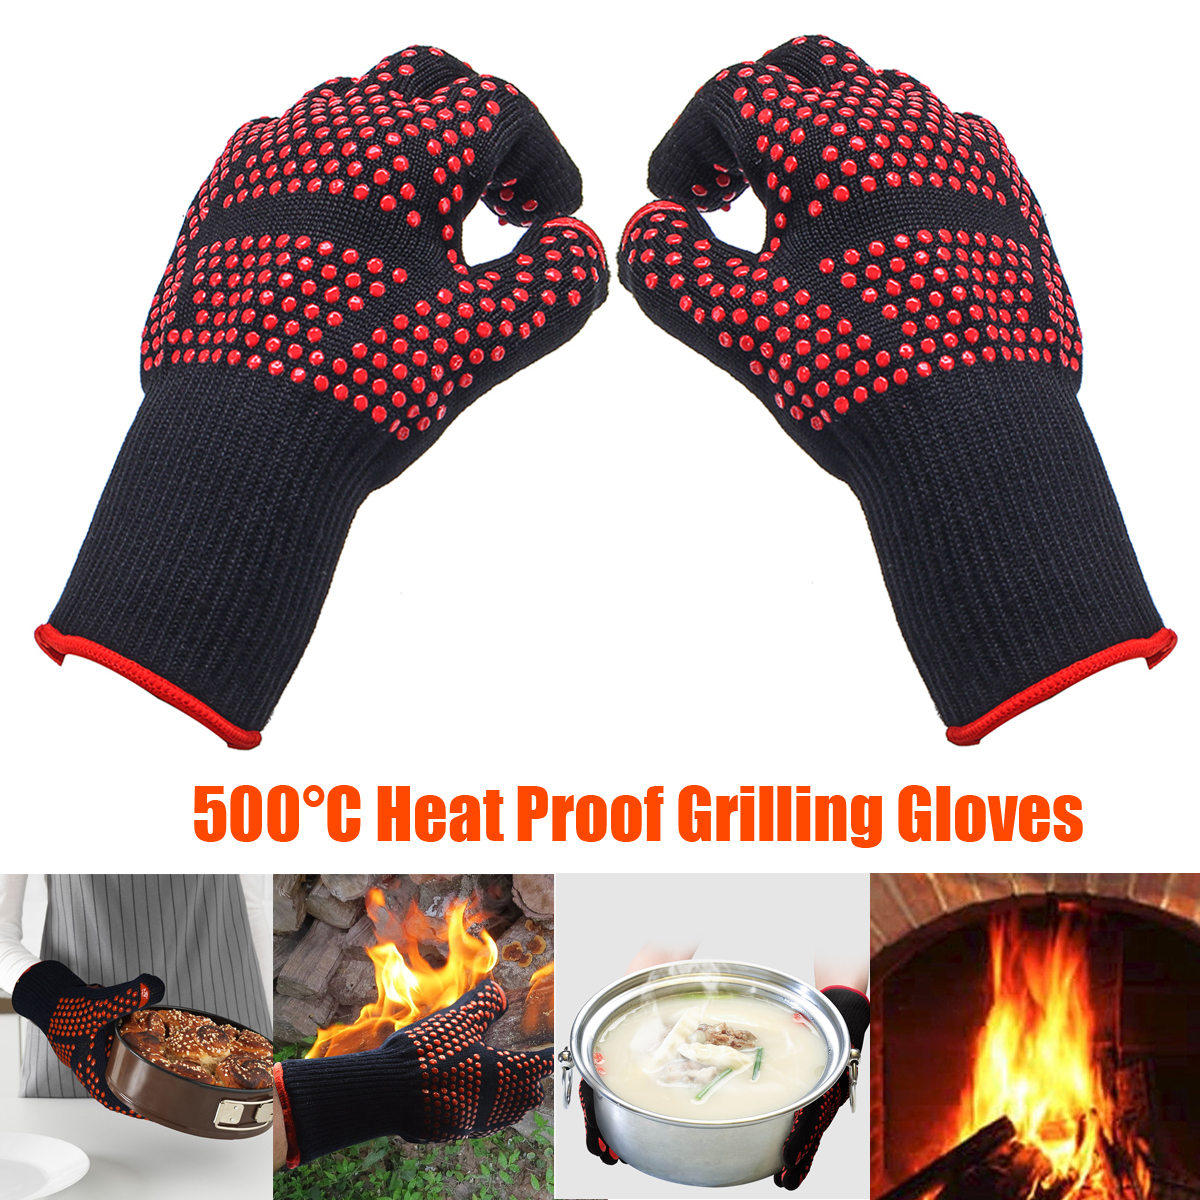 1-pair-500degC-Heat-Proof-Grilling-Gloves-BBQ-Kitchen-Cooking-Industrial-Work-Tools-1336700